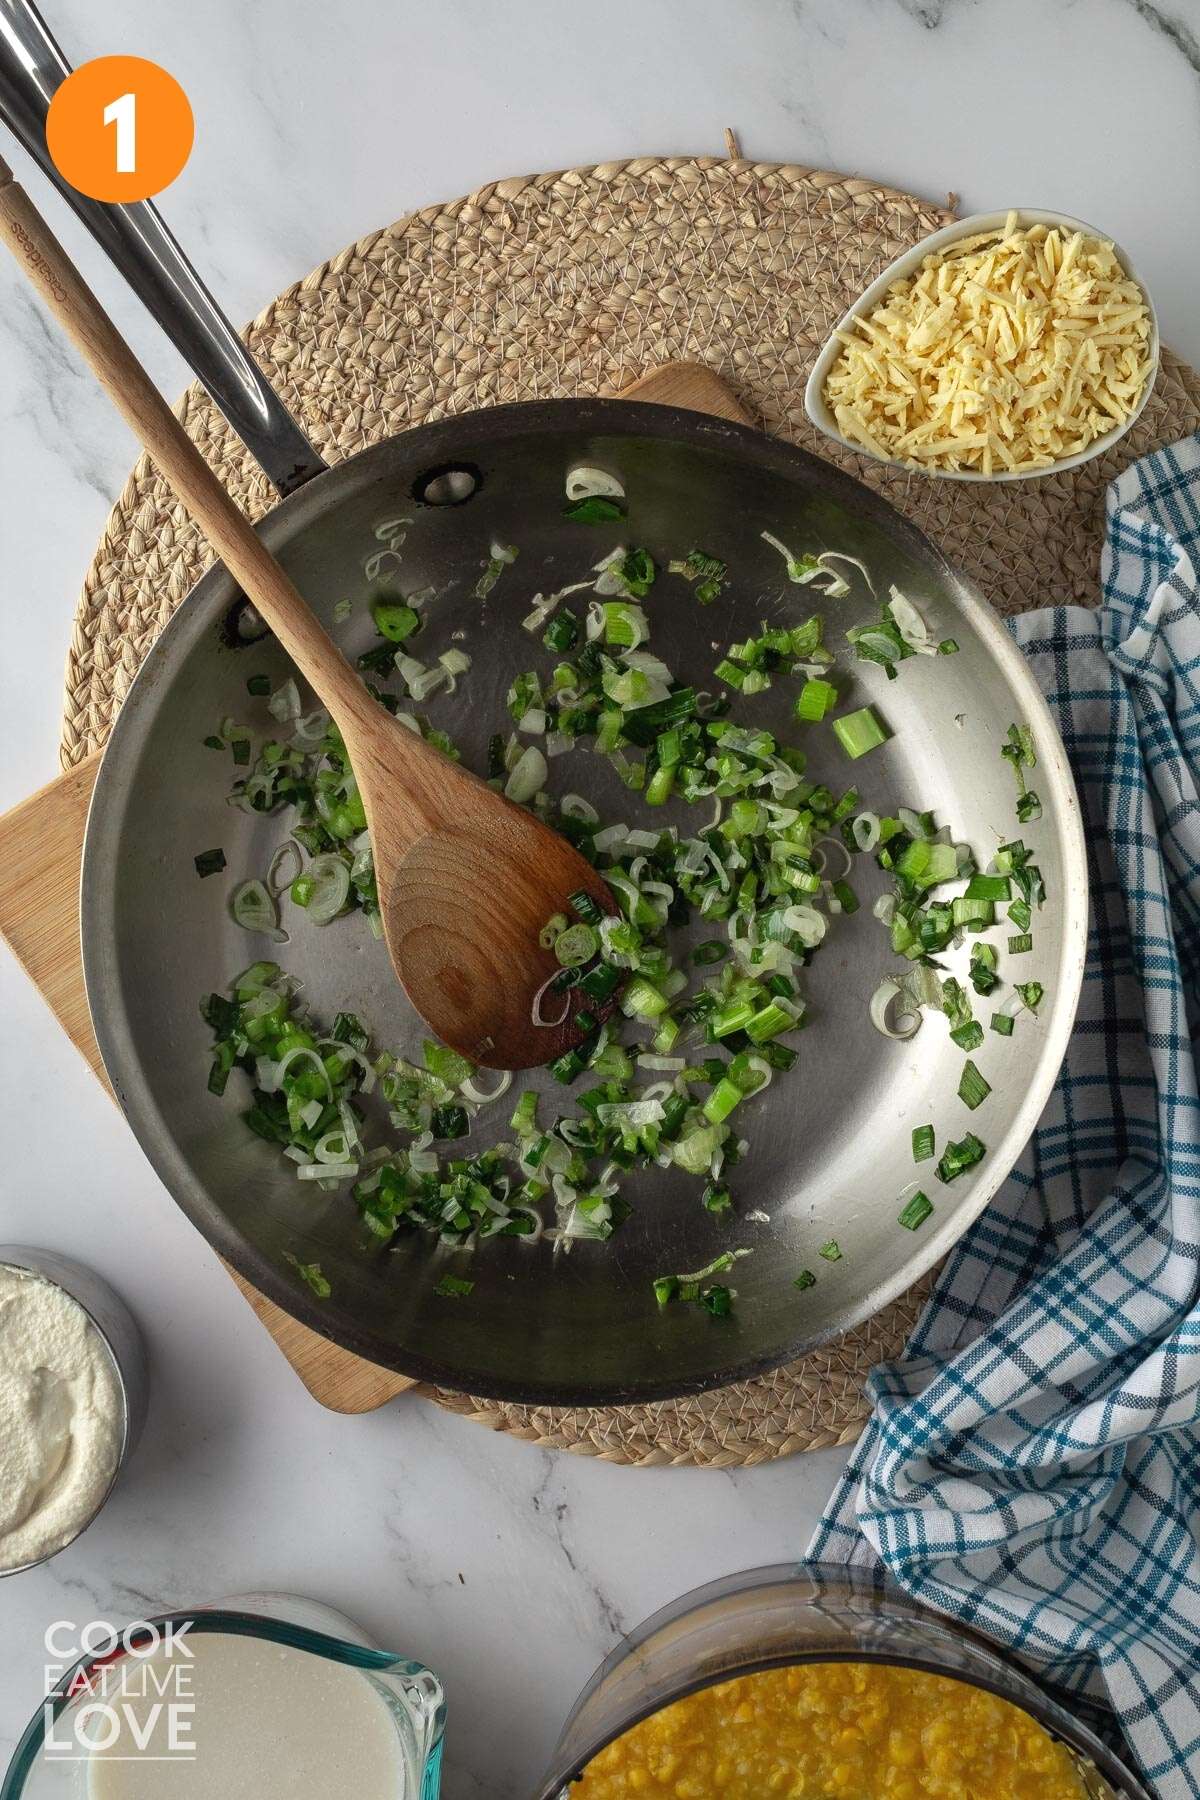 Green onions in a skillet with a wooden spoon in it and other ingredients around it.